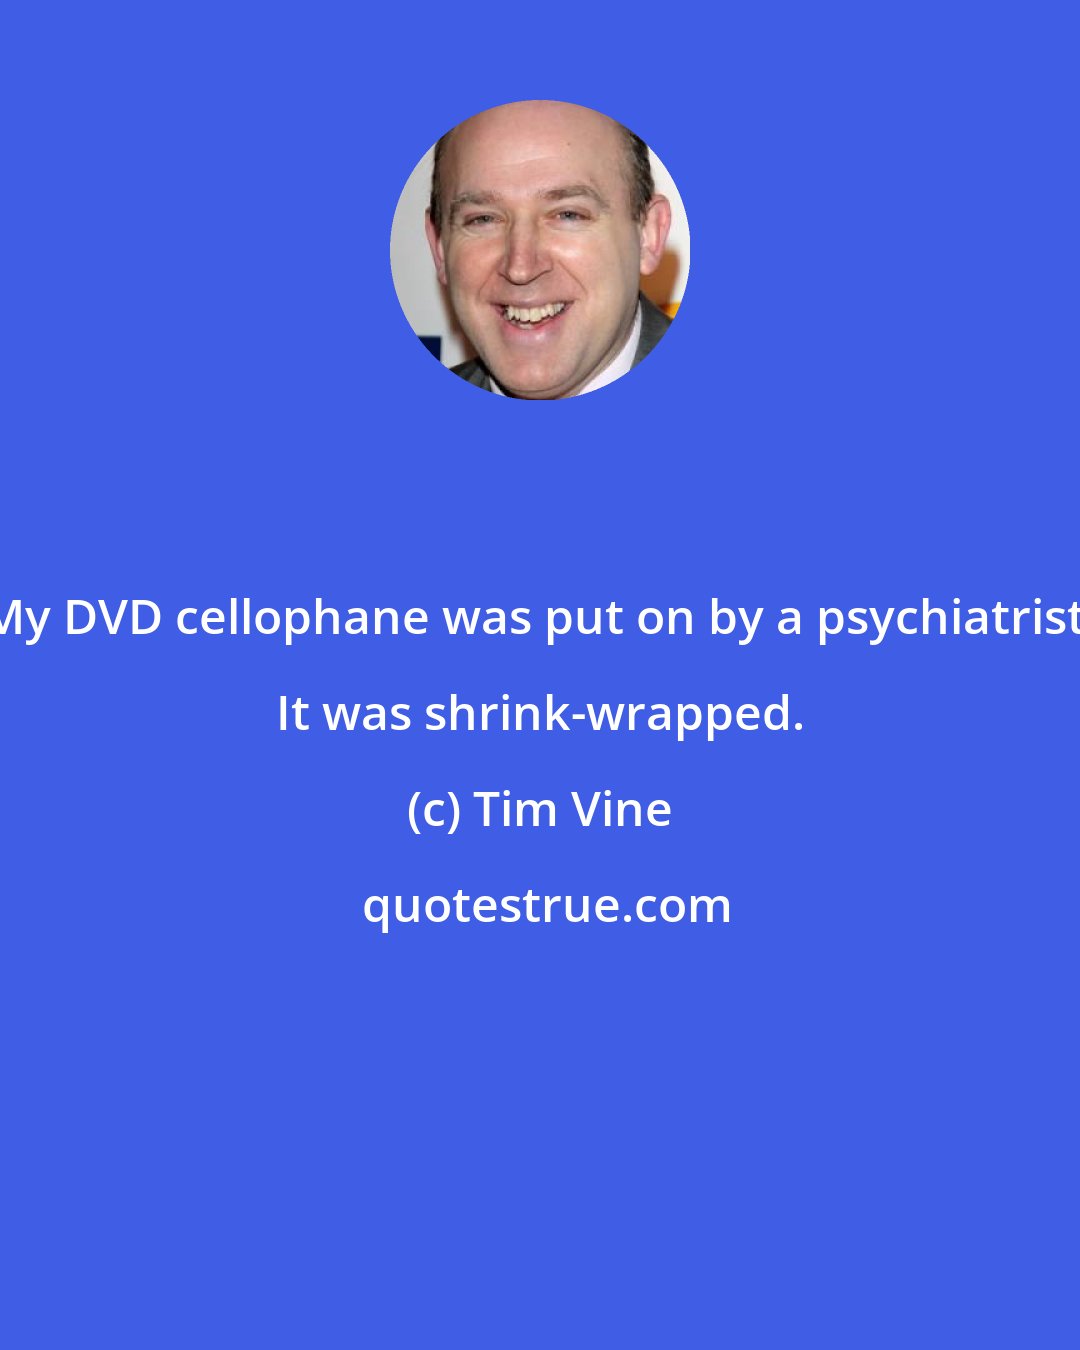 Tim Vine: My DVD cellophane was put on by a psychiatrist. It was shrink-wrapped.